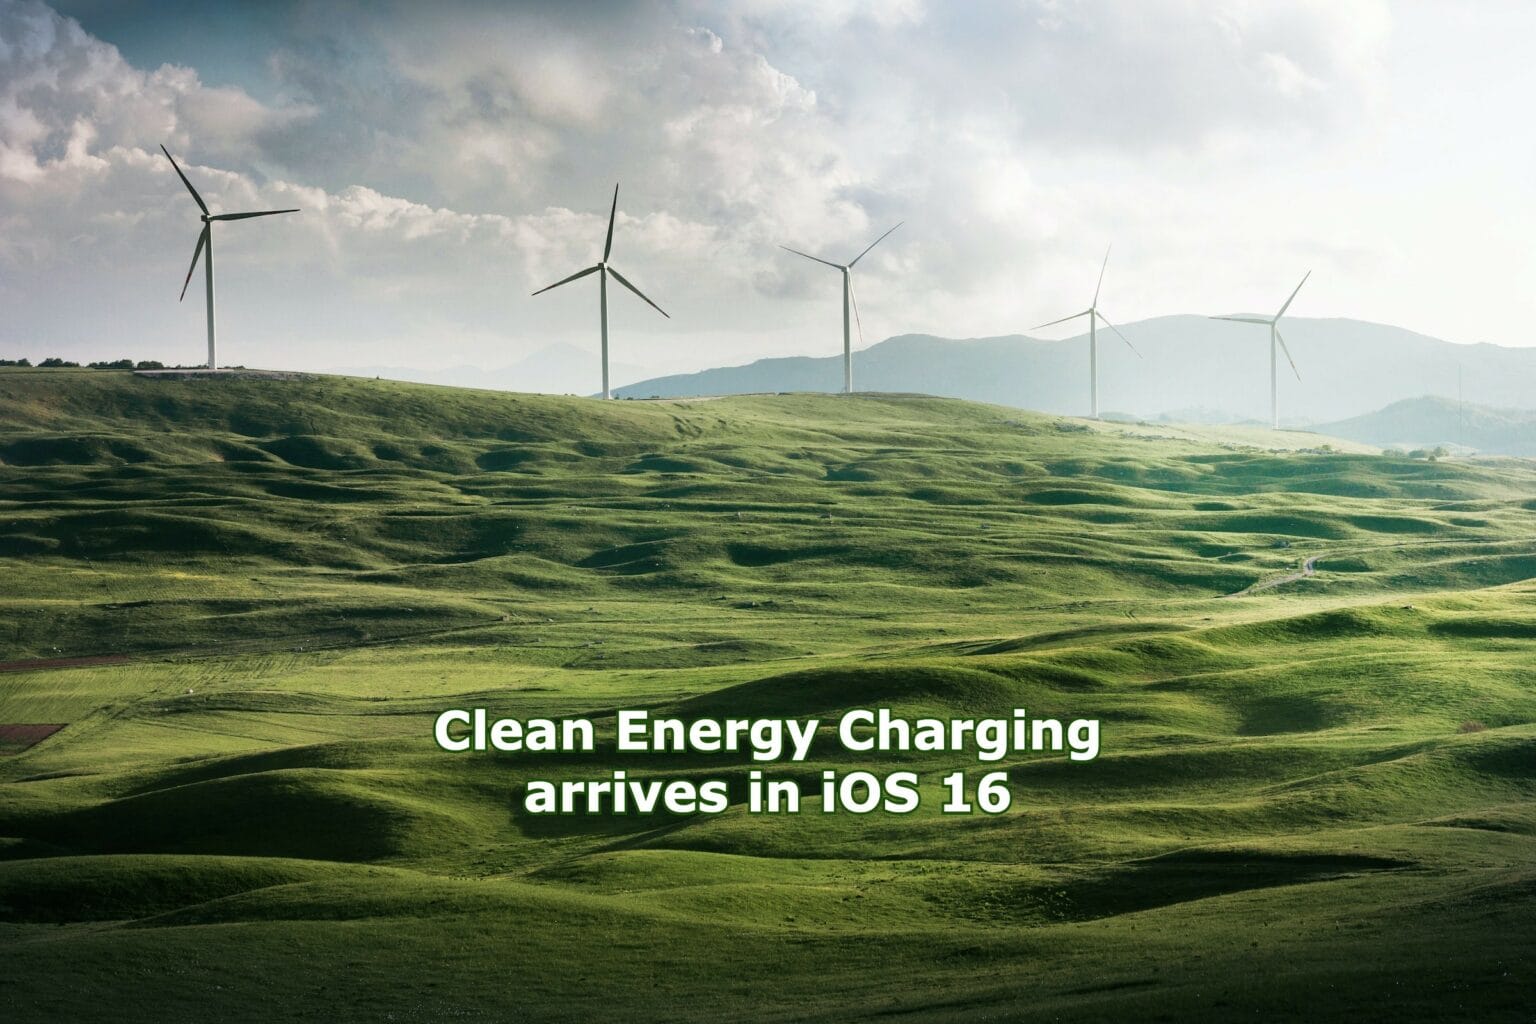 Clean Energy Charging feature in iOS 16: You can soon charge your iPhone using clean energy